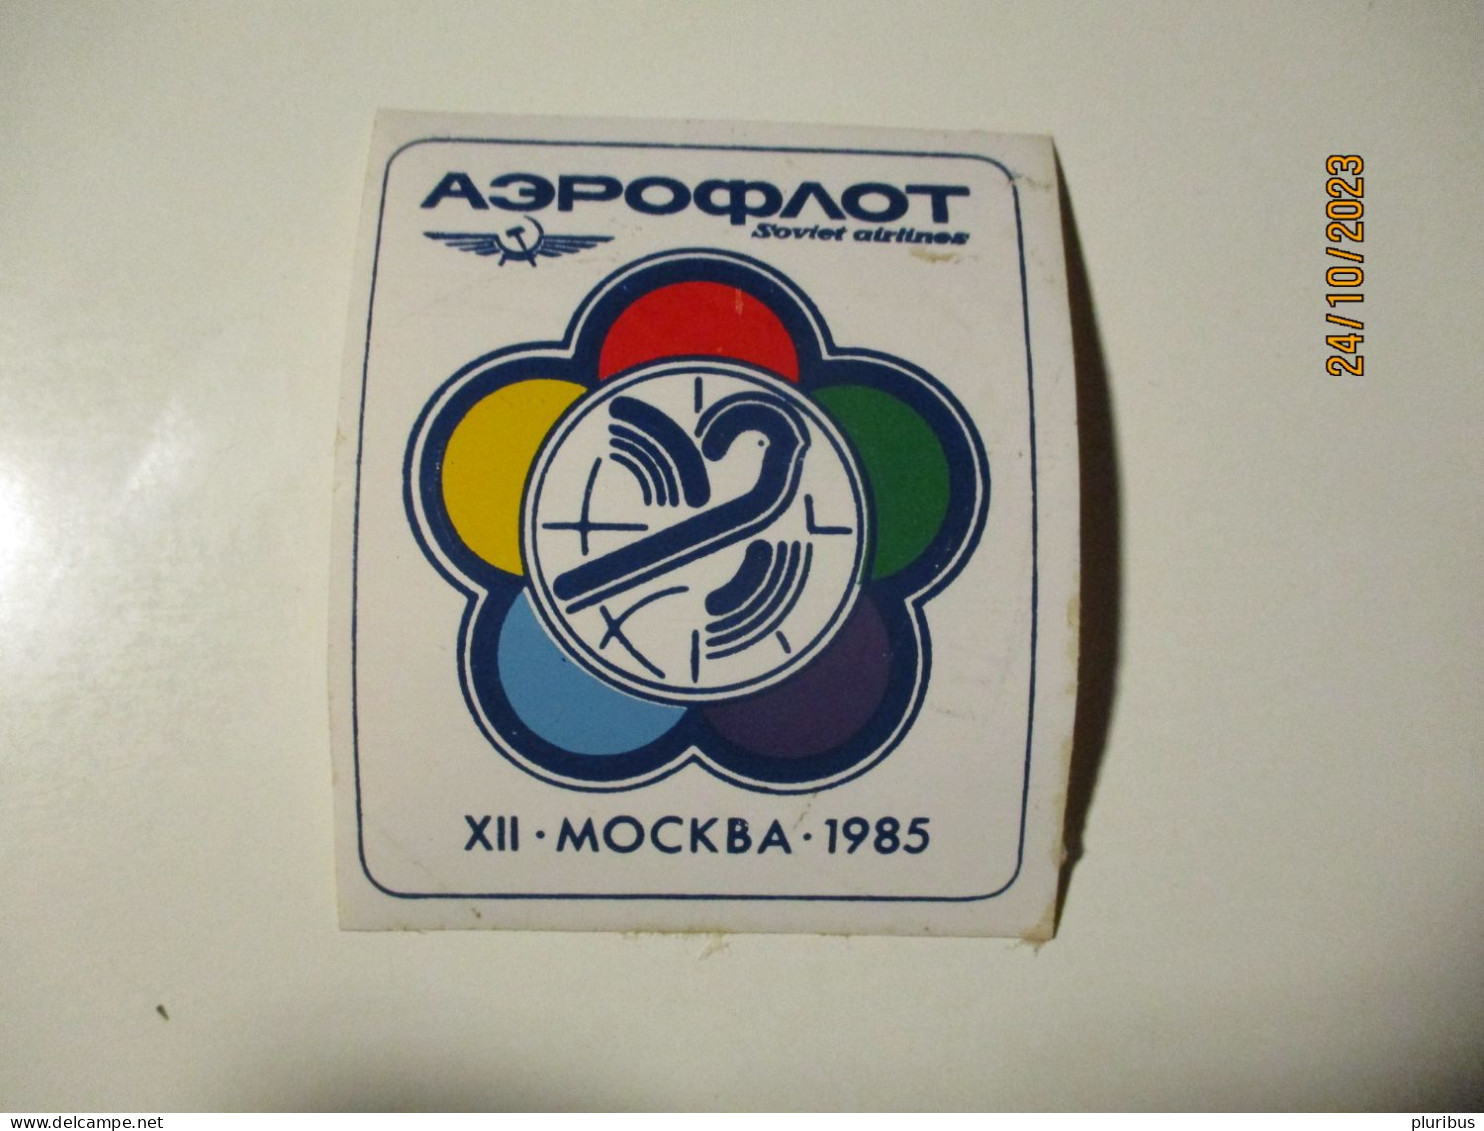 USS RUSSIA AEROFLOT 1985 MOSCOW YOUTH FESTIVAL STICKER - Stickers